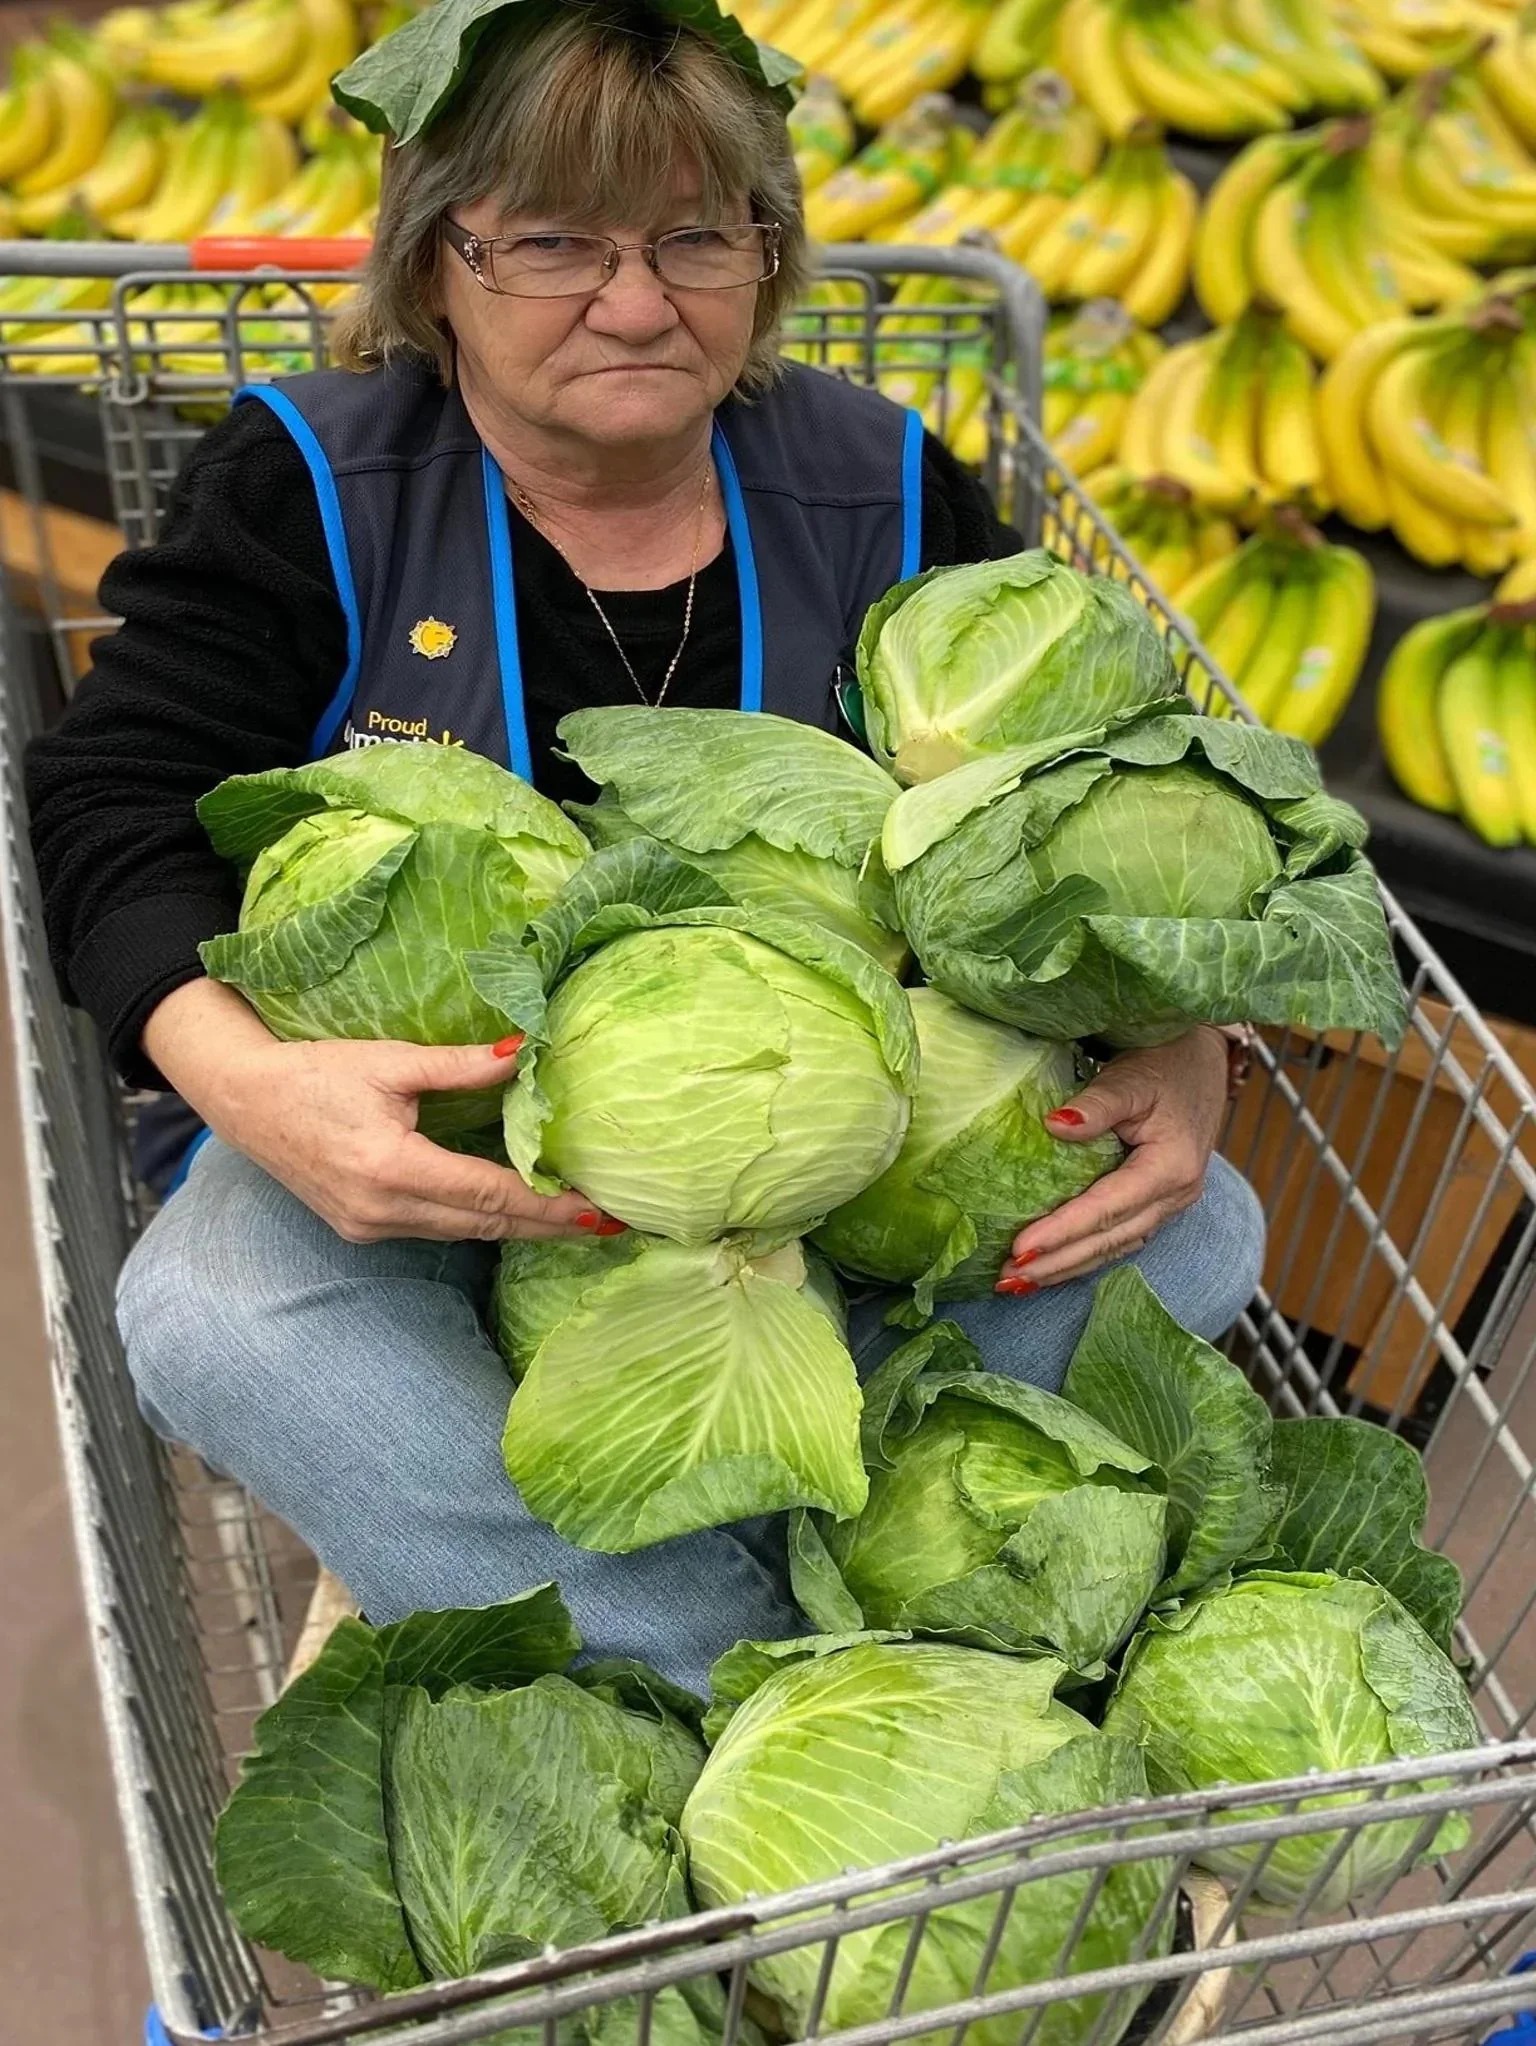 High Quality Cabbage Retail Worker Blank Meme Template